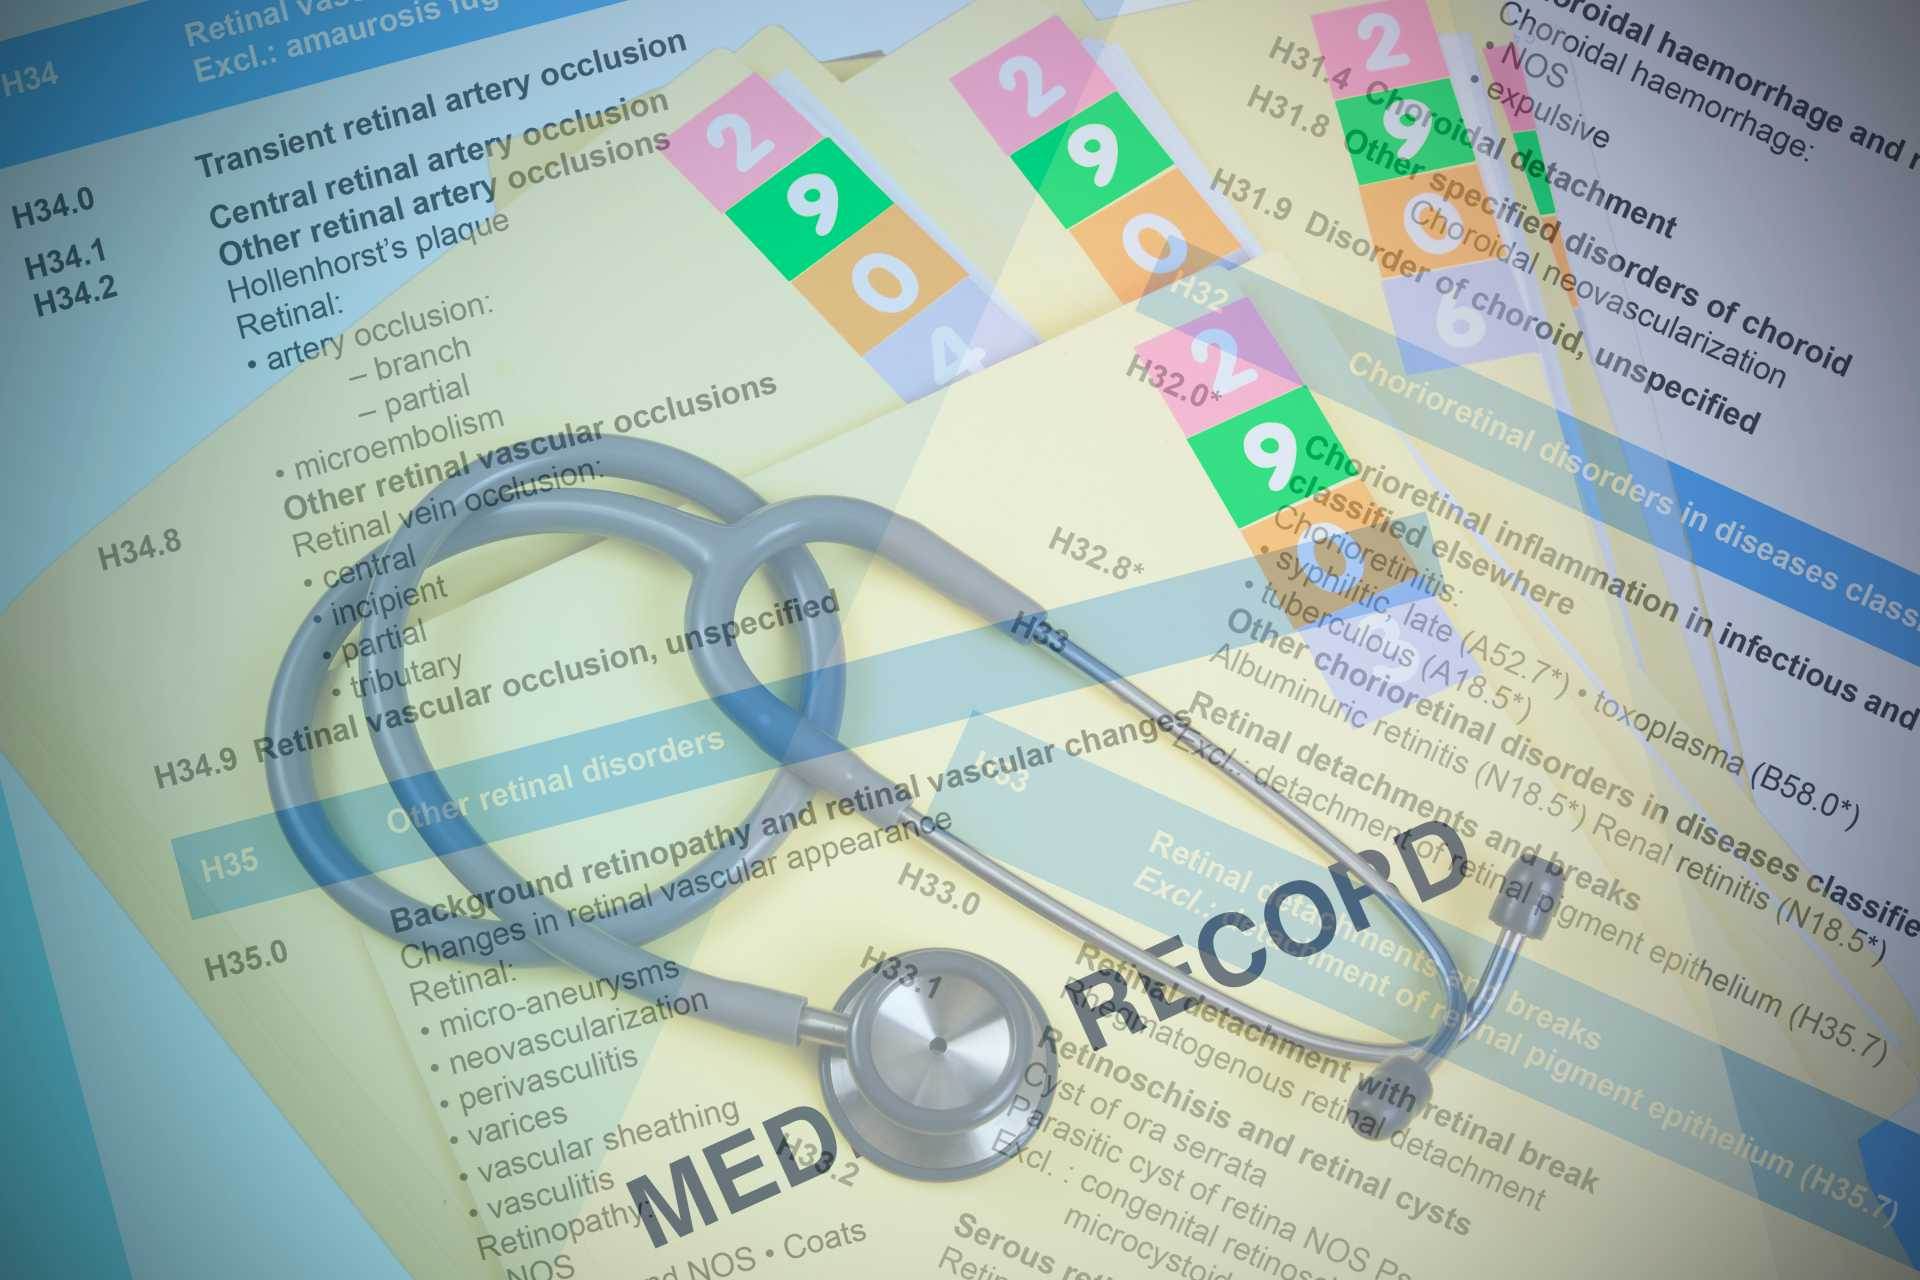 Nearly 400 New Diagnosis Codes Coming This Fall, CMS Announces